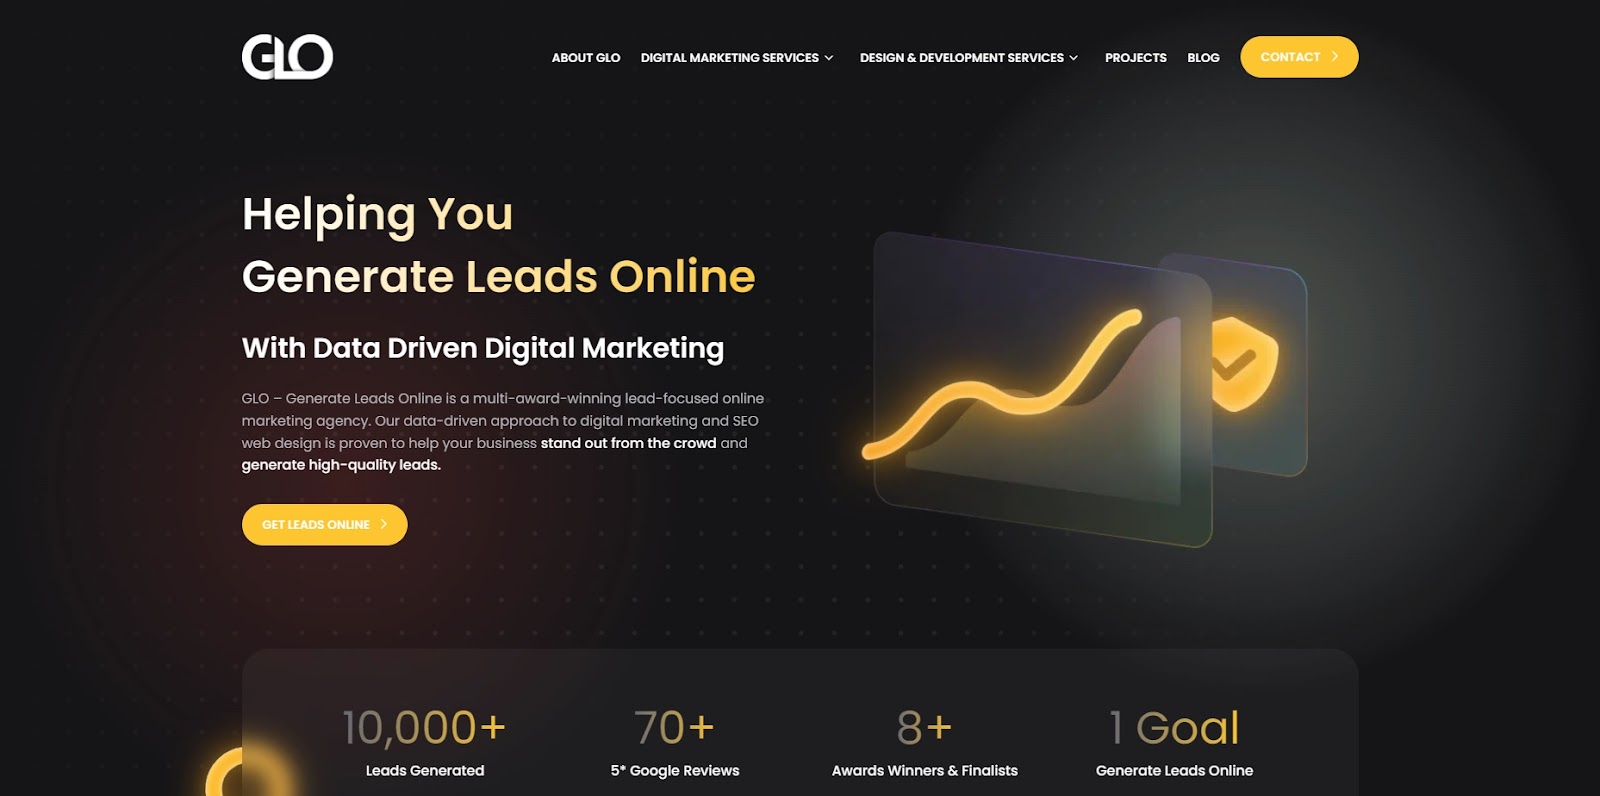 GLO - Generate Leads Online is a UK based lead generation company.